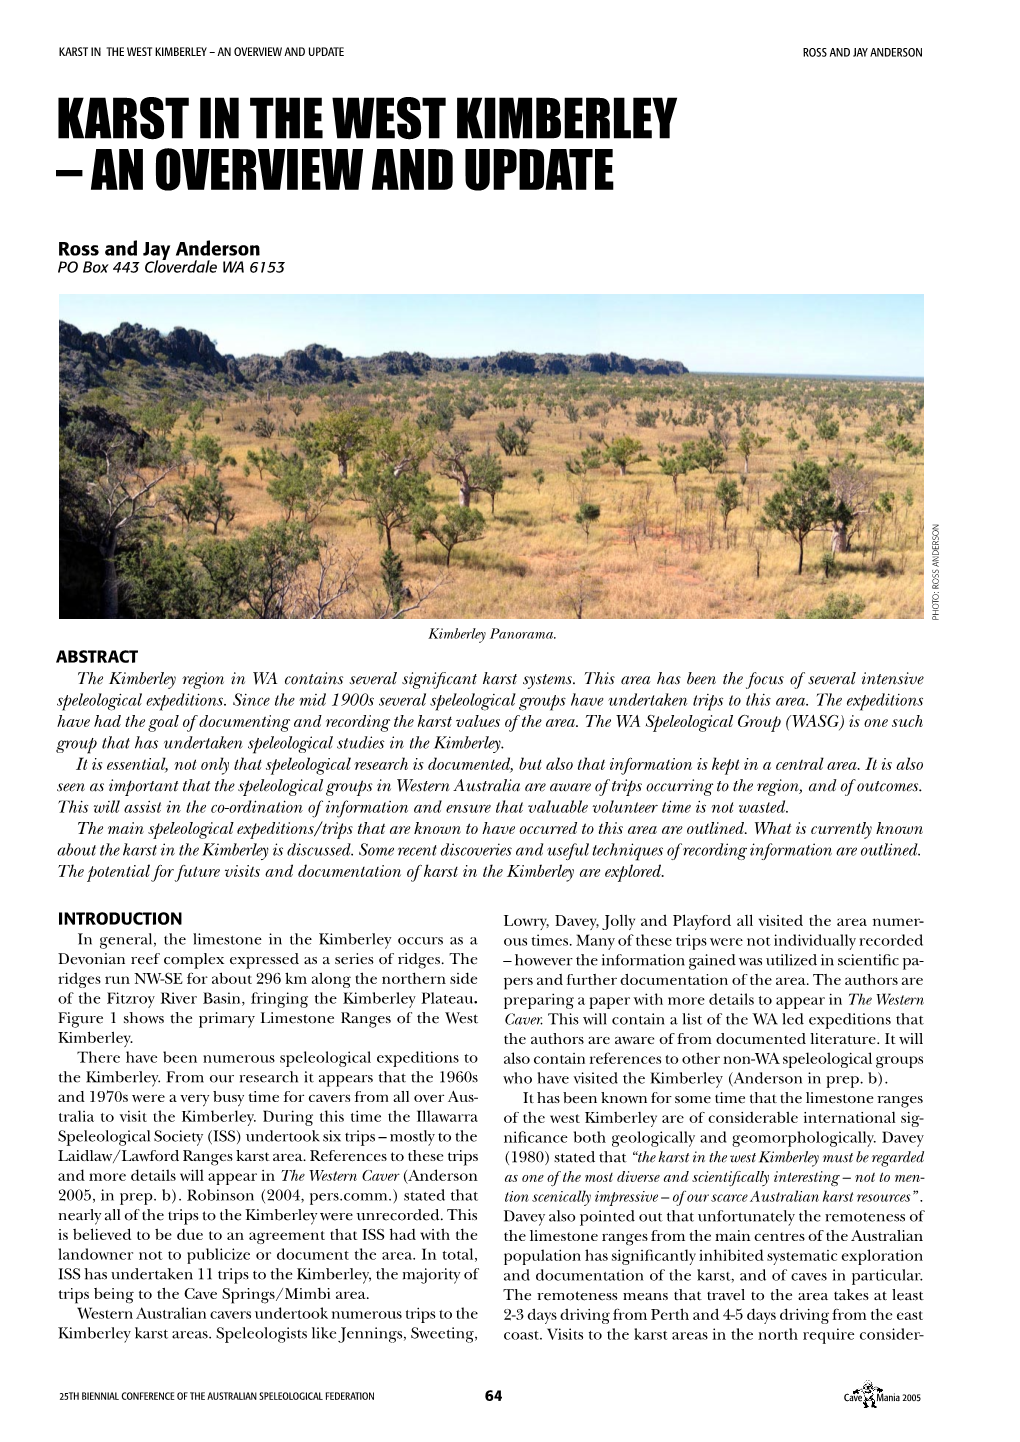 Karst in the West Kimberley – an Overview and Update Ross and Jay Anderson Karst in the West Kimberley – an Overview and Update